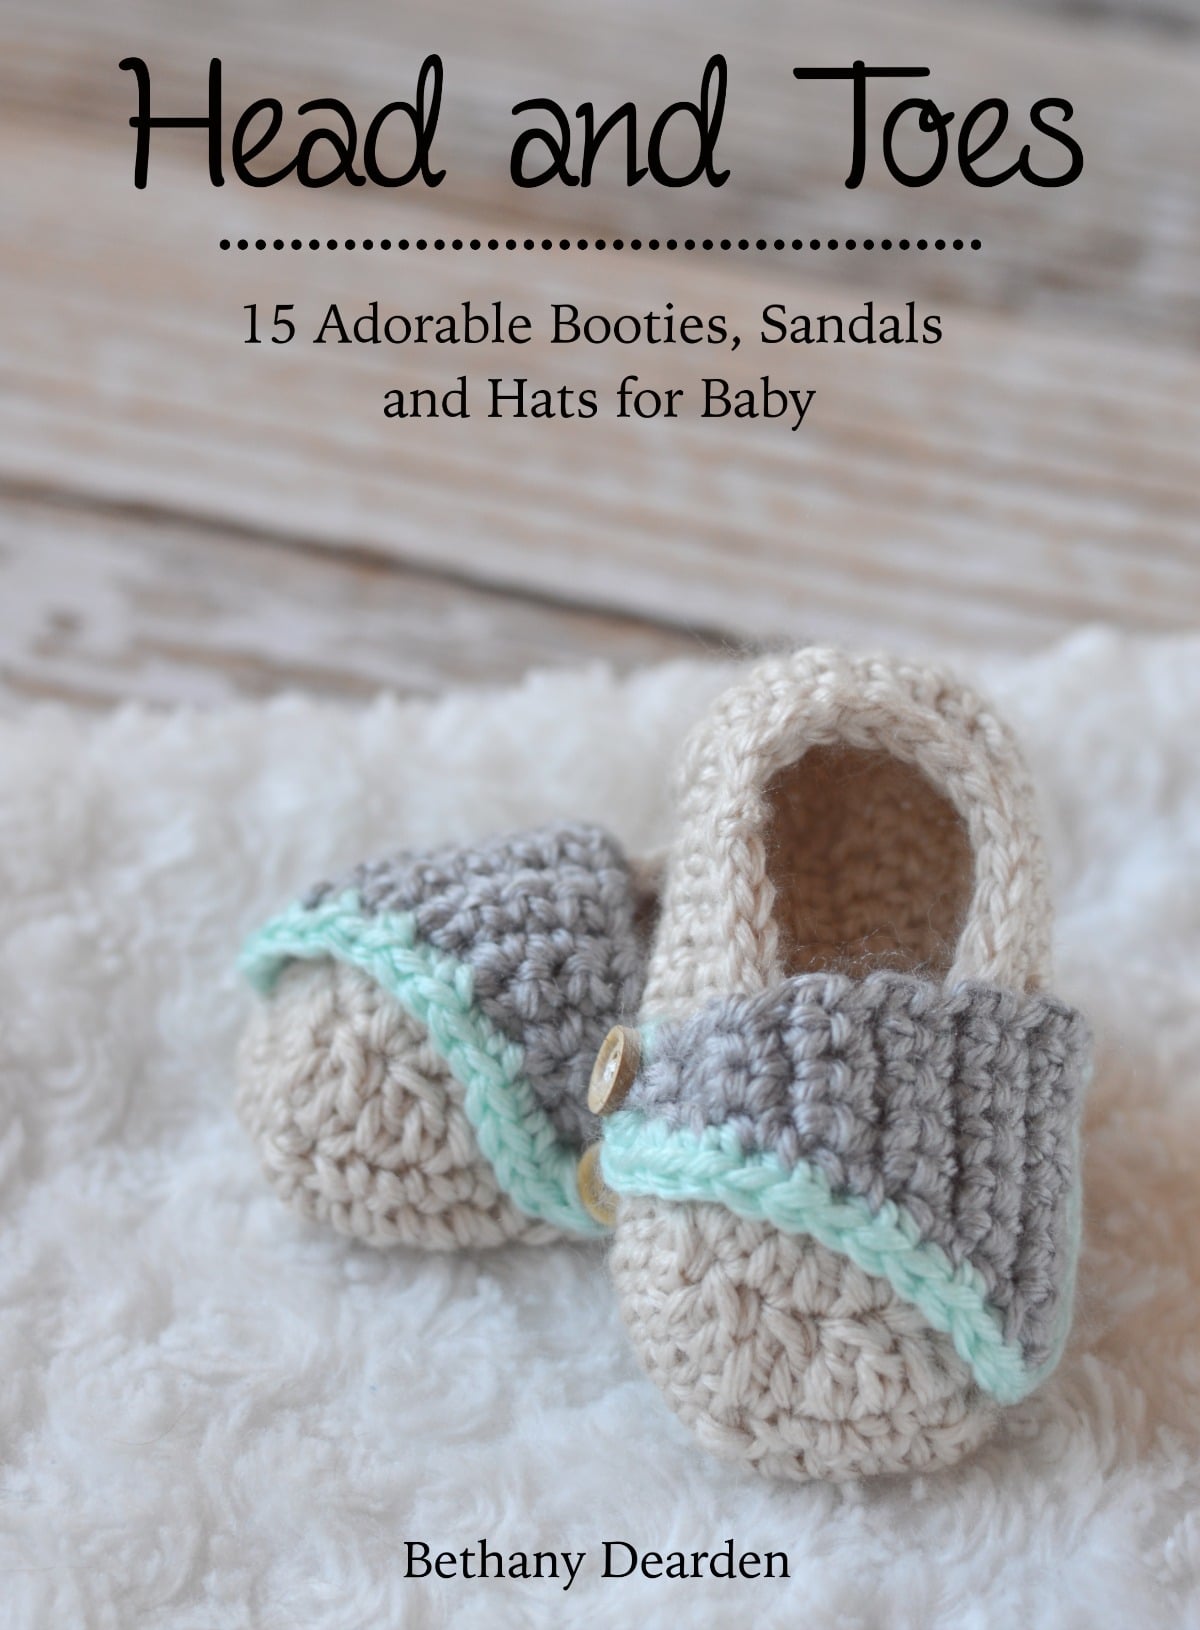 Head to Toes – 15 Adorable Patterns for Baby